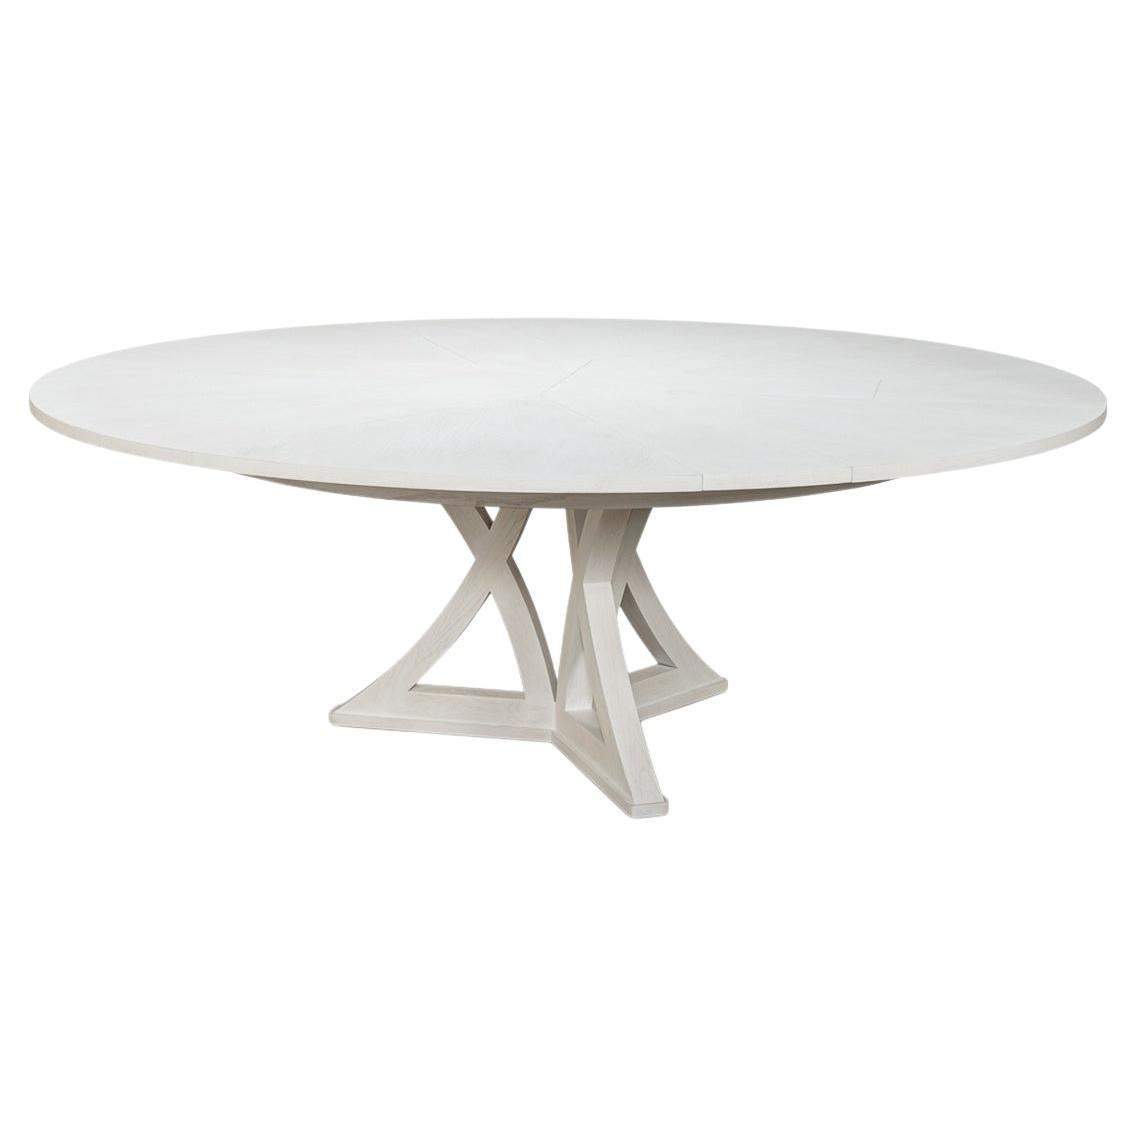 Rustic Round Dining Table, Working White For Sale